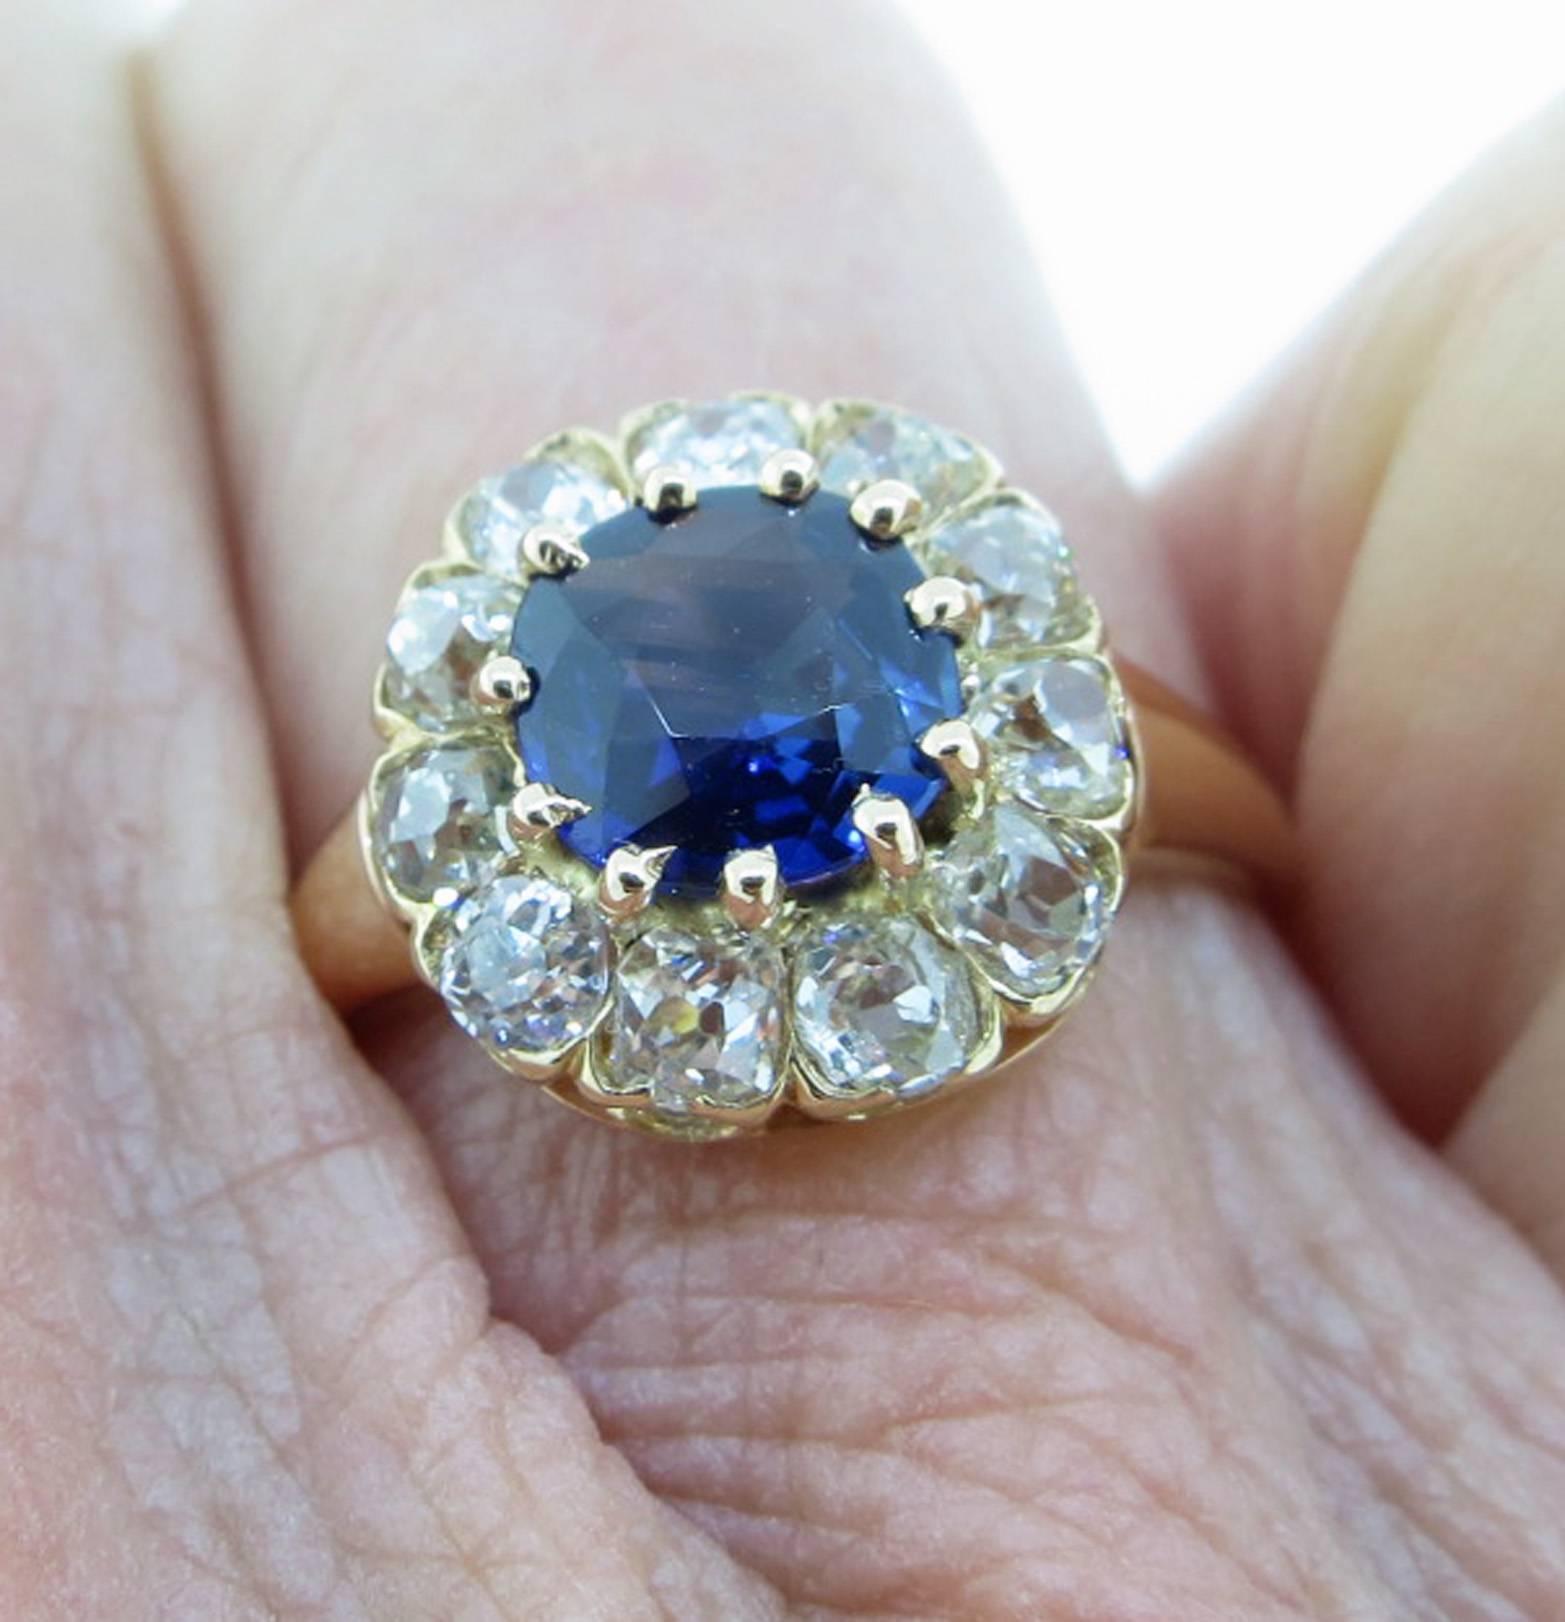 14kt. yellow gold sapphire and diamond cluster ring, the center is set with a natural blue faceted sapphire weighing approx 1.0ct. surrounded with 11 old cushion cut diamonds totaling approx  .70cts. grading VS clarity I color. The ring is size 6